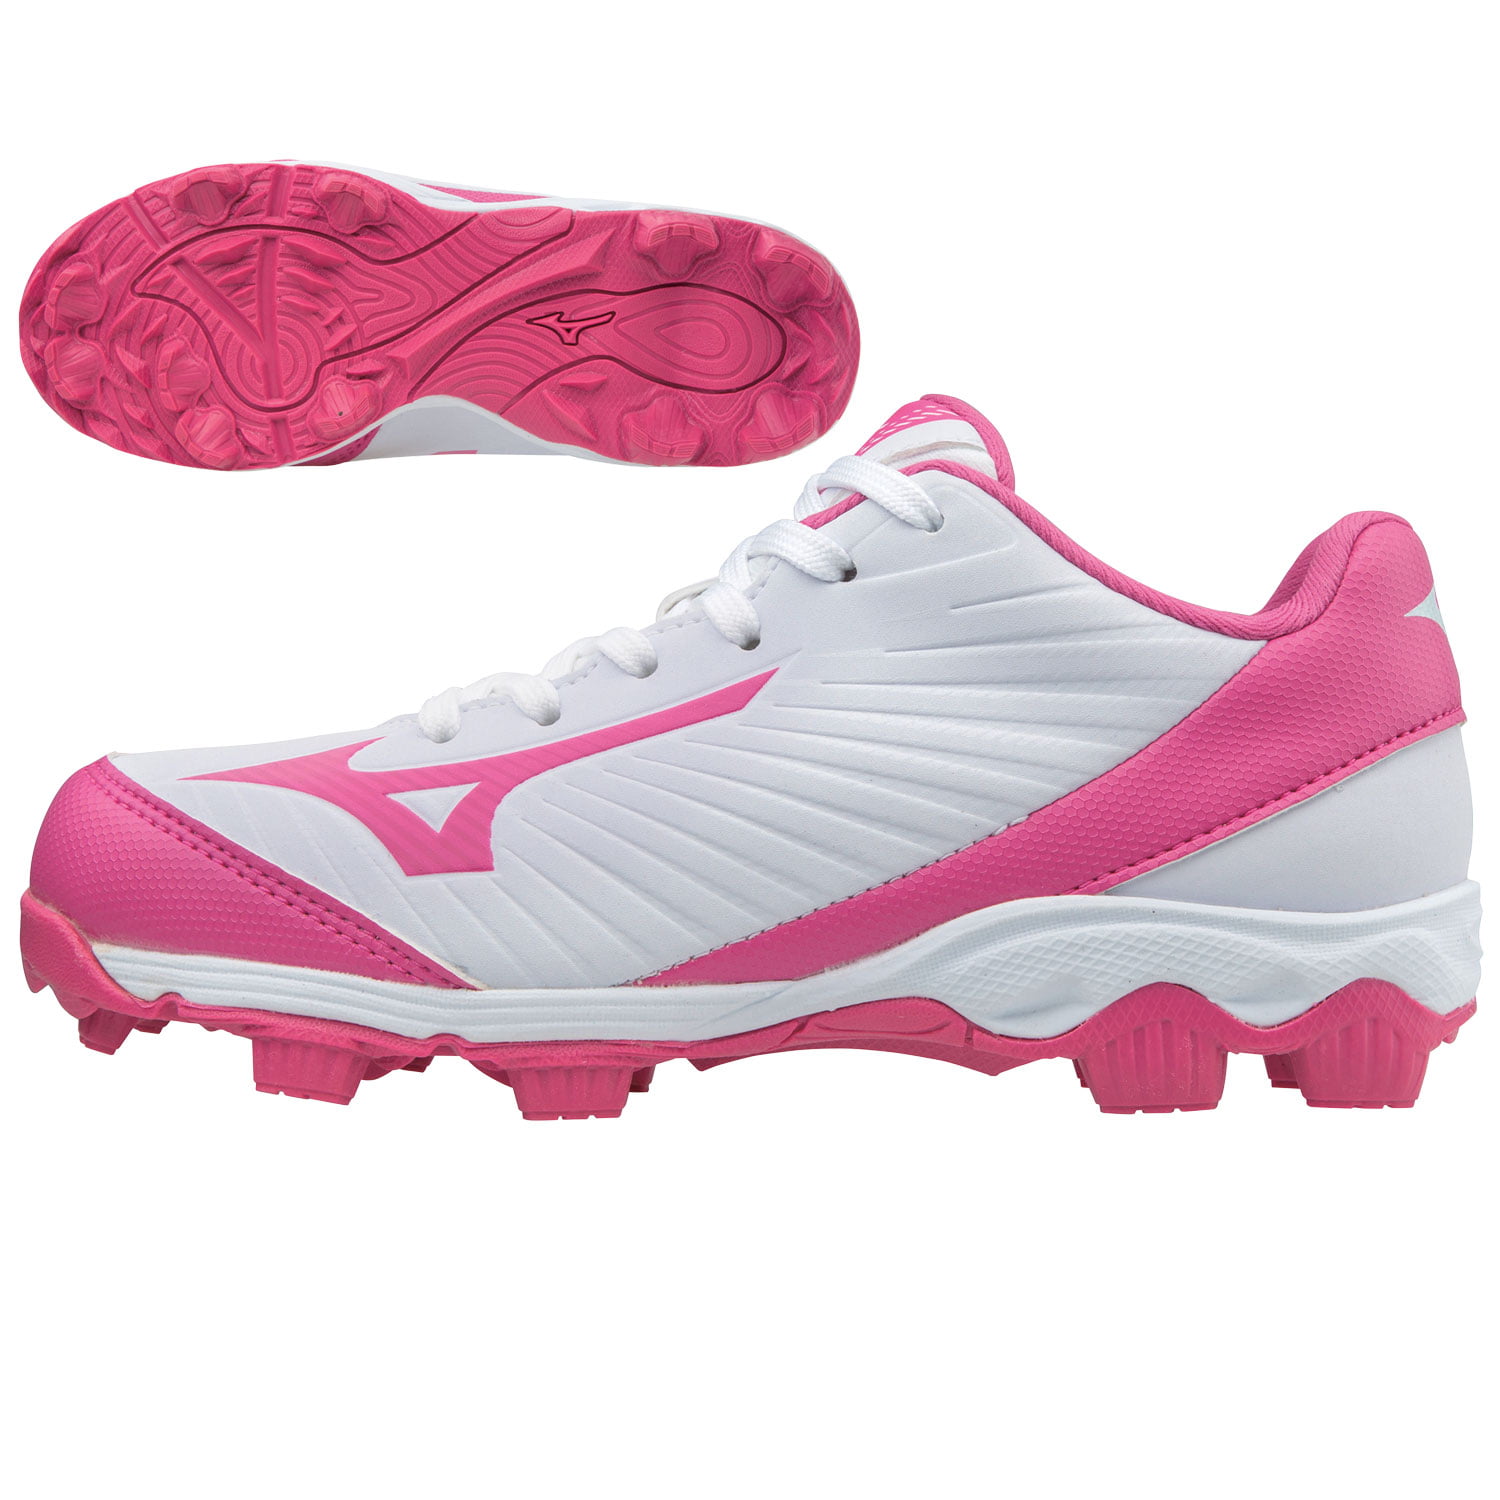 Mizuno Women/Youth Finch Franchise 5 Softball Cleats Multiple Sizes New In Box 